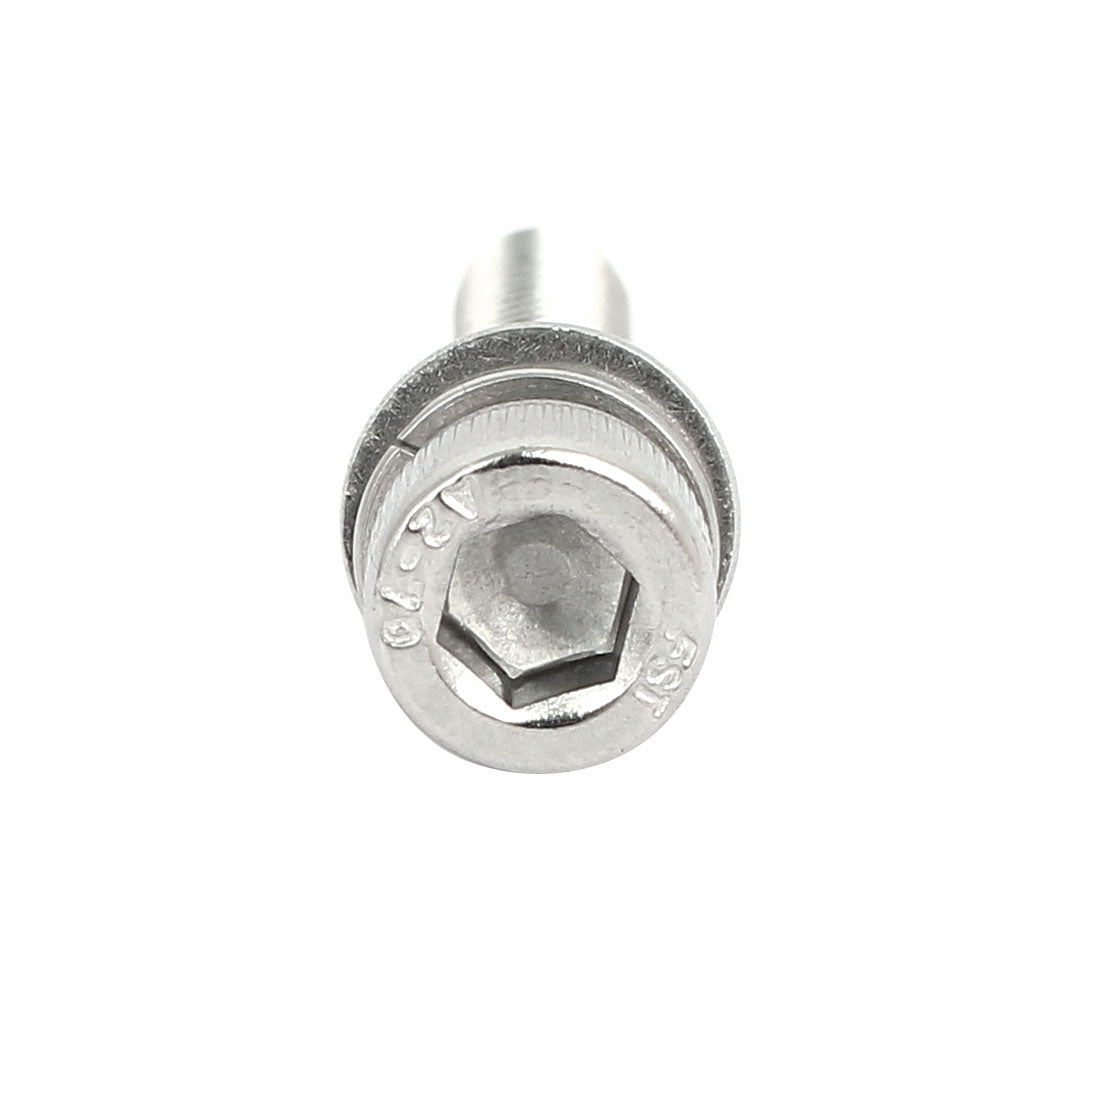 uxcell Uxcell M6x30mm 304 Stainless Steel Hex Socket Head Cap Bolt Screw Nut w Washer 8 Sets